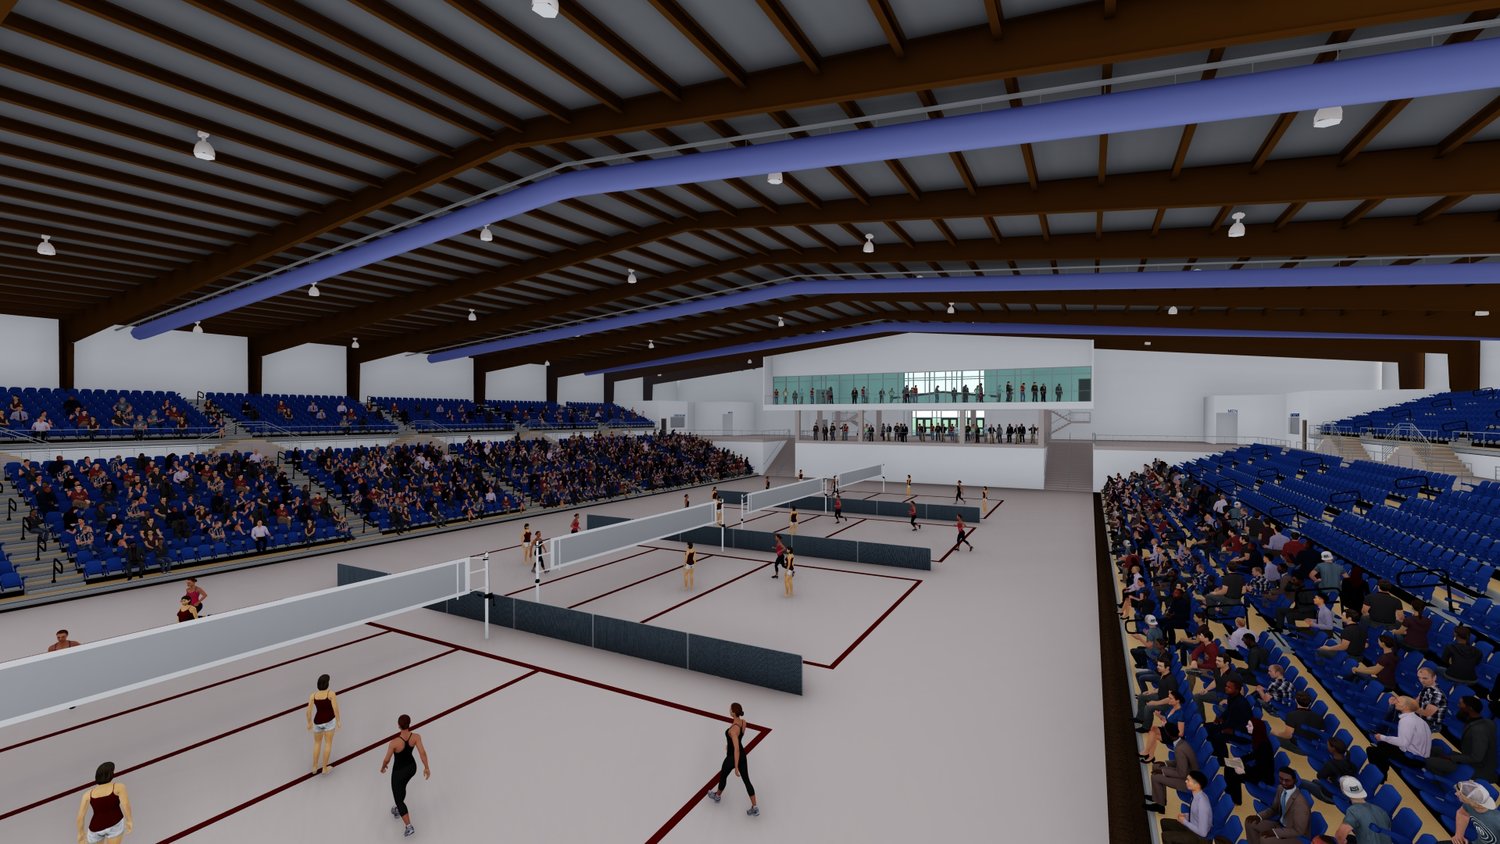 Sporting events, such as volleyball tournaments, are among options Ozarks Empire Fairgrounds officials say will be possible with the new arena expected to start construction this year.